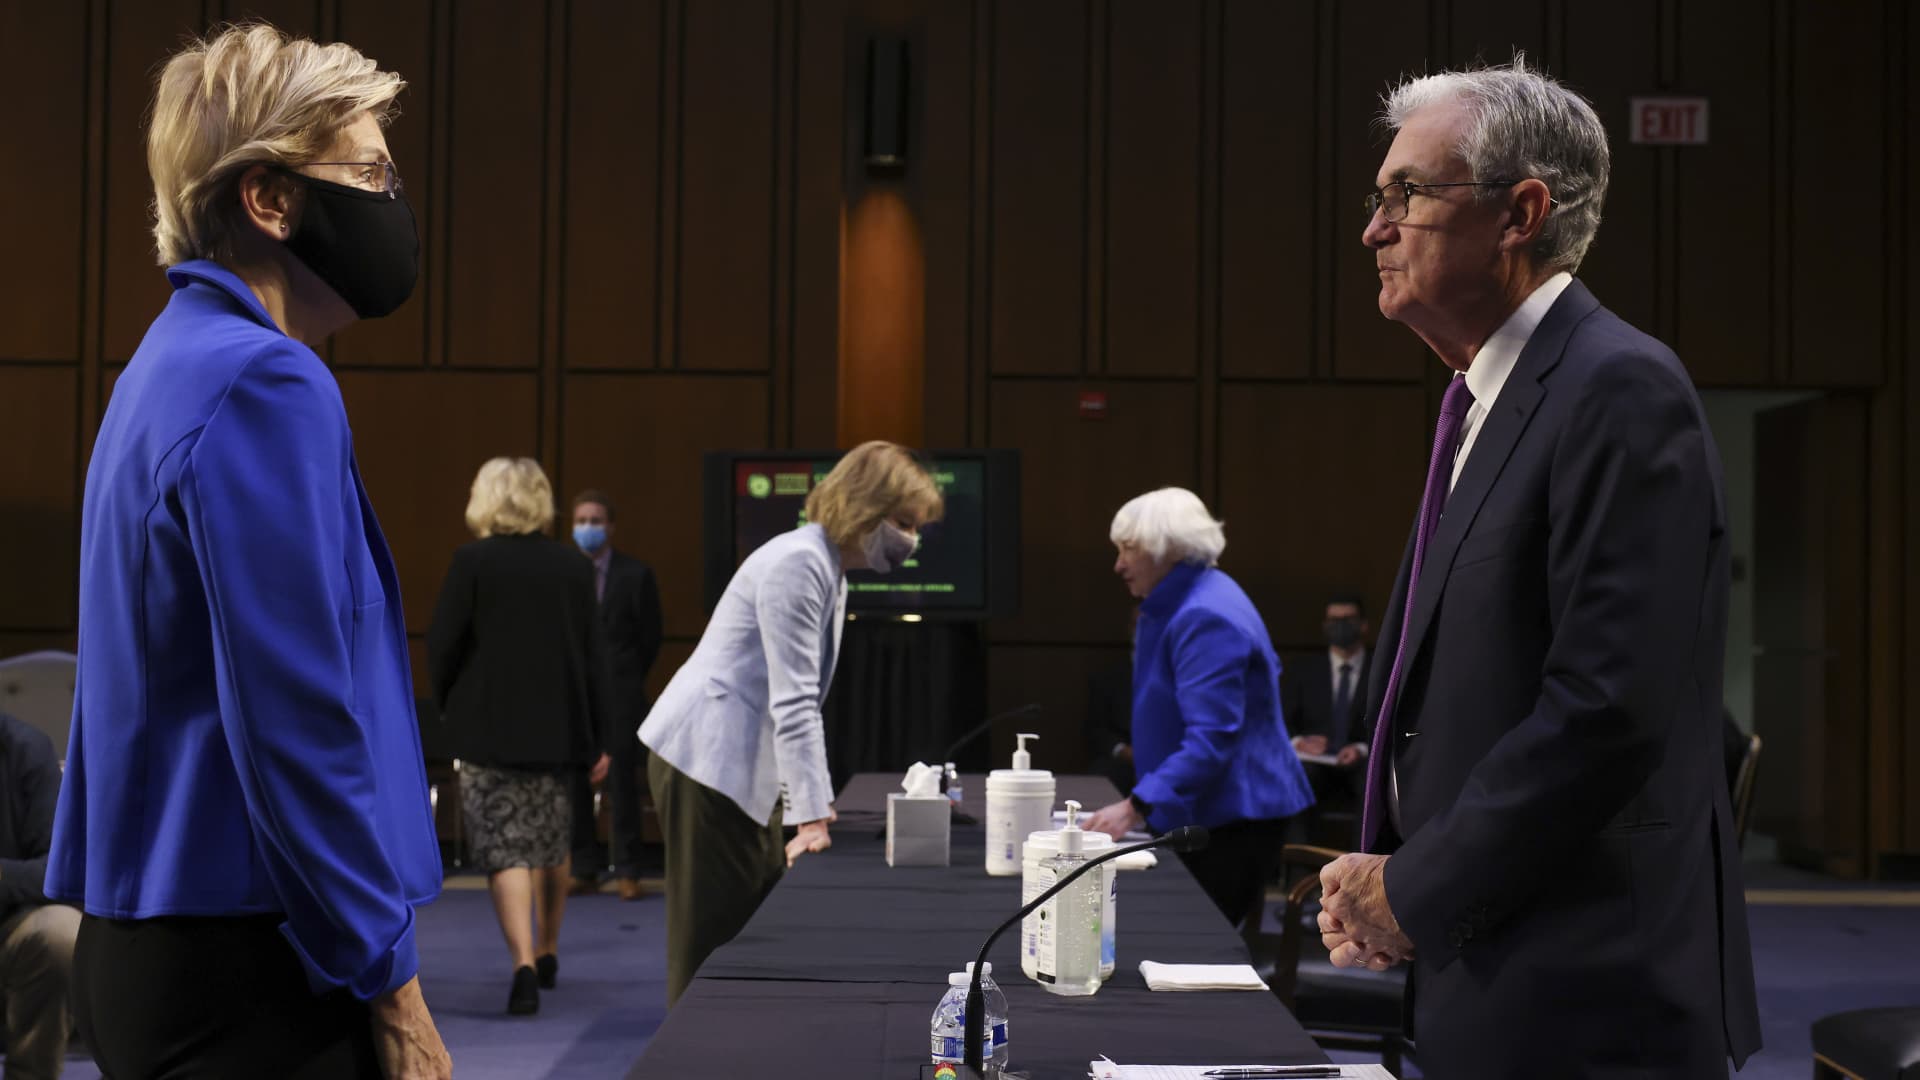 Senator Elizabeth Warren, a Democrat from Massachusetts, left, speaks with Jerome Powell, chairman of the U.S. Federal Reserve, during a Senate Banking, Housing and Urban Affairs Committee hearing in Washington, D.C., U.S., on Tuesday, Sept. 28, 2021.